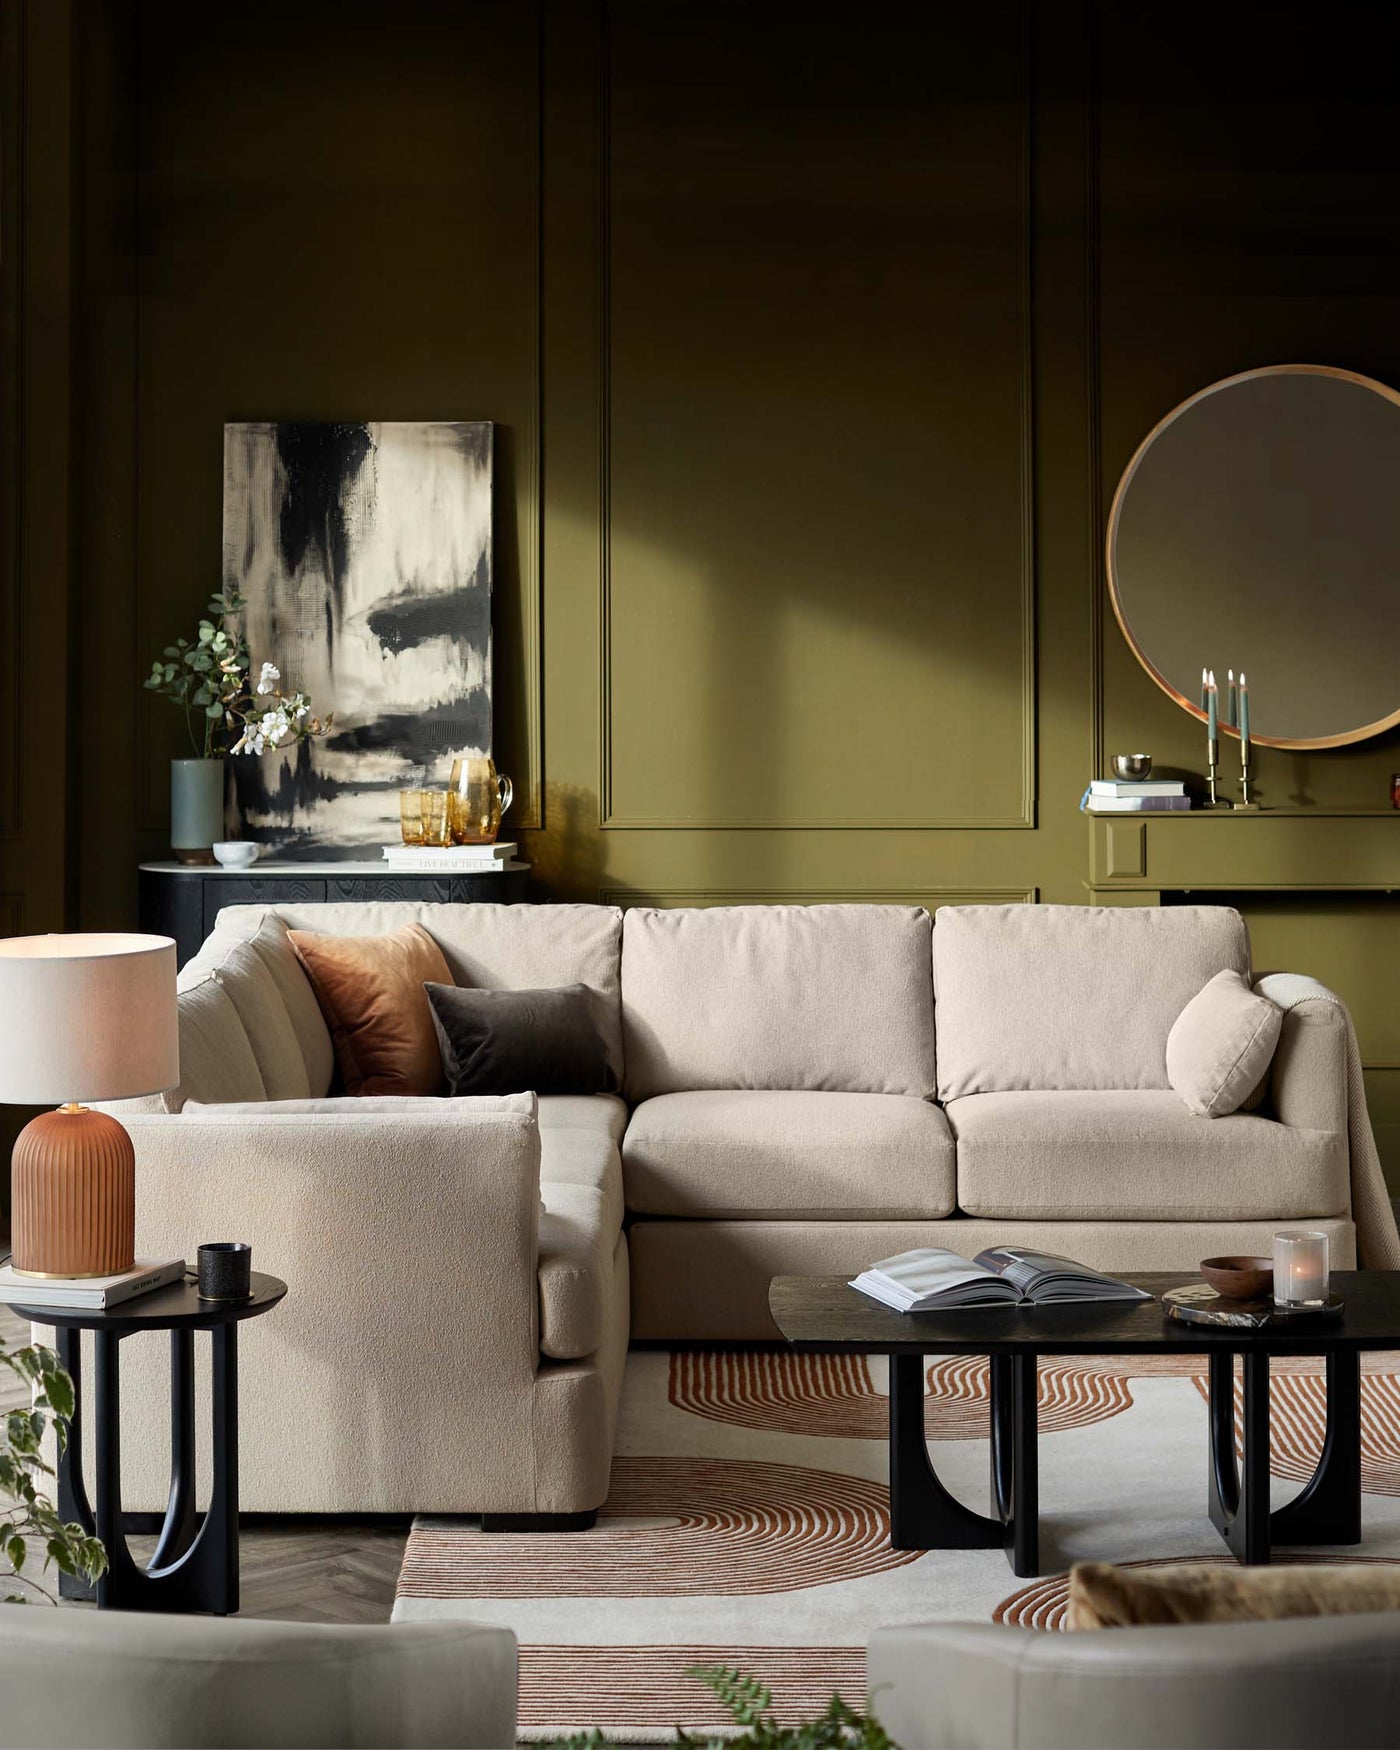 A contemporary living room featuring a modular L-shaped beige sofa with plush cushions, paired with round black nested coffee tables with a matte finish. A matching black side table holds a stylish orange table lamp. The furniture is complemented by an abstract painting and circled wall mirror, creating an elegant and cosy atmosphere.